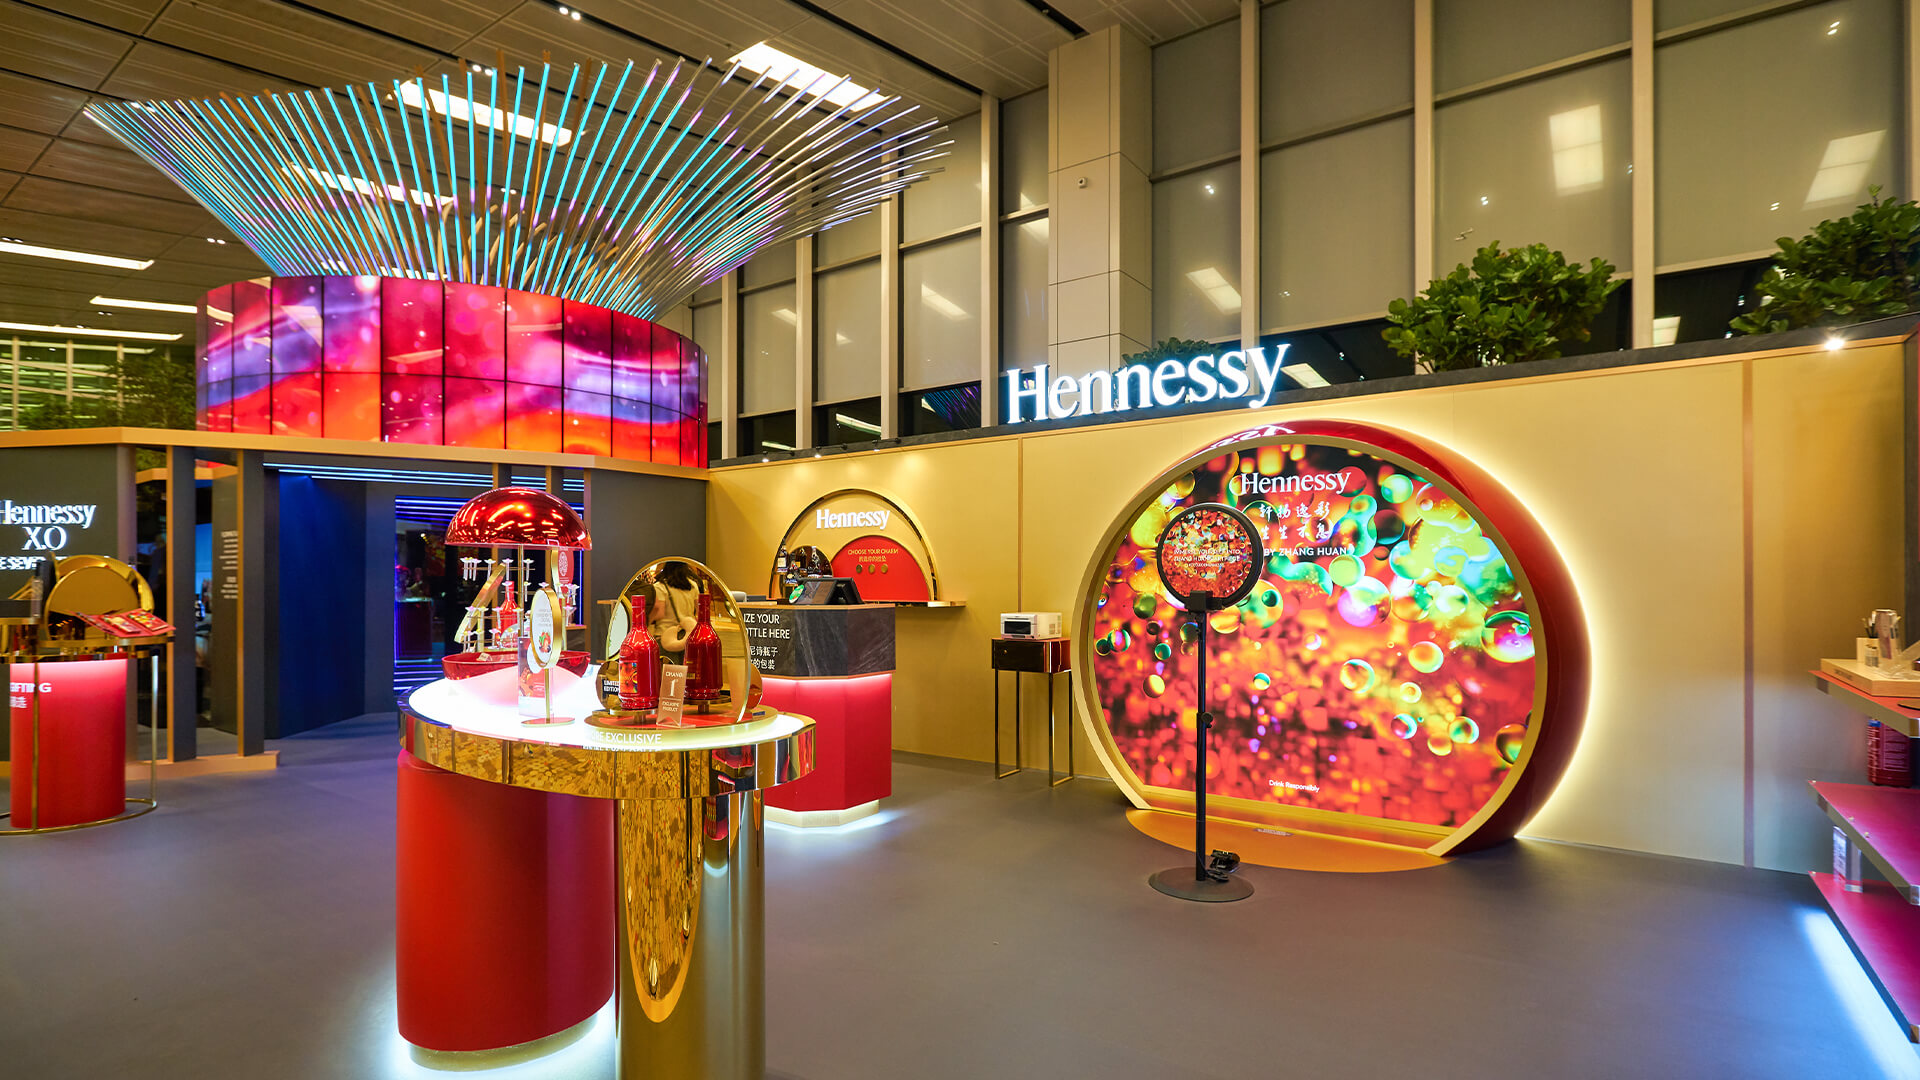 Hennessy pop up store in Singapore